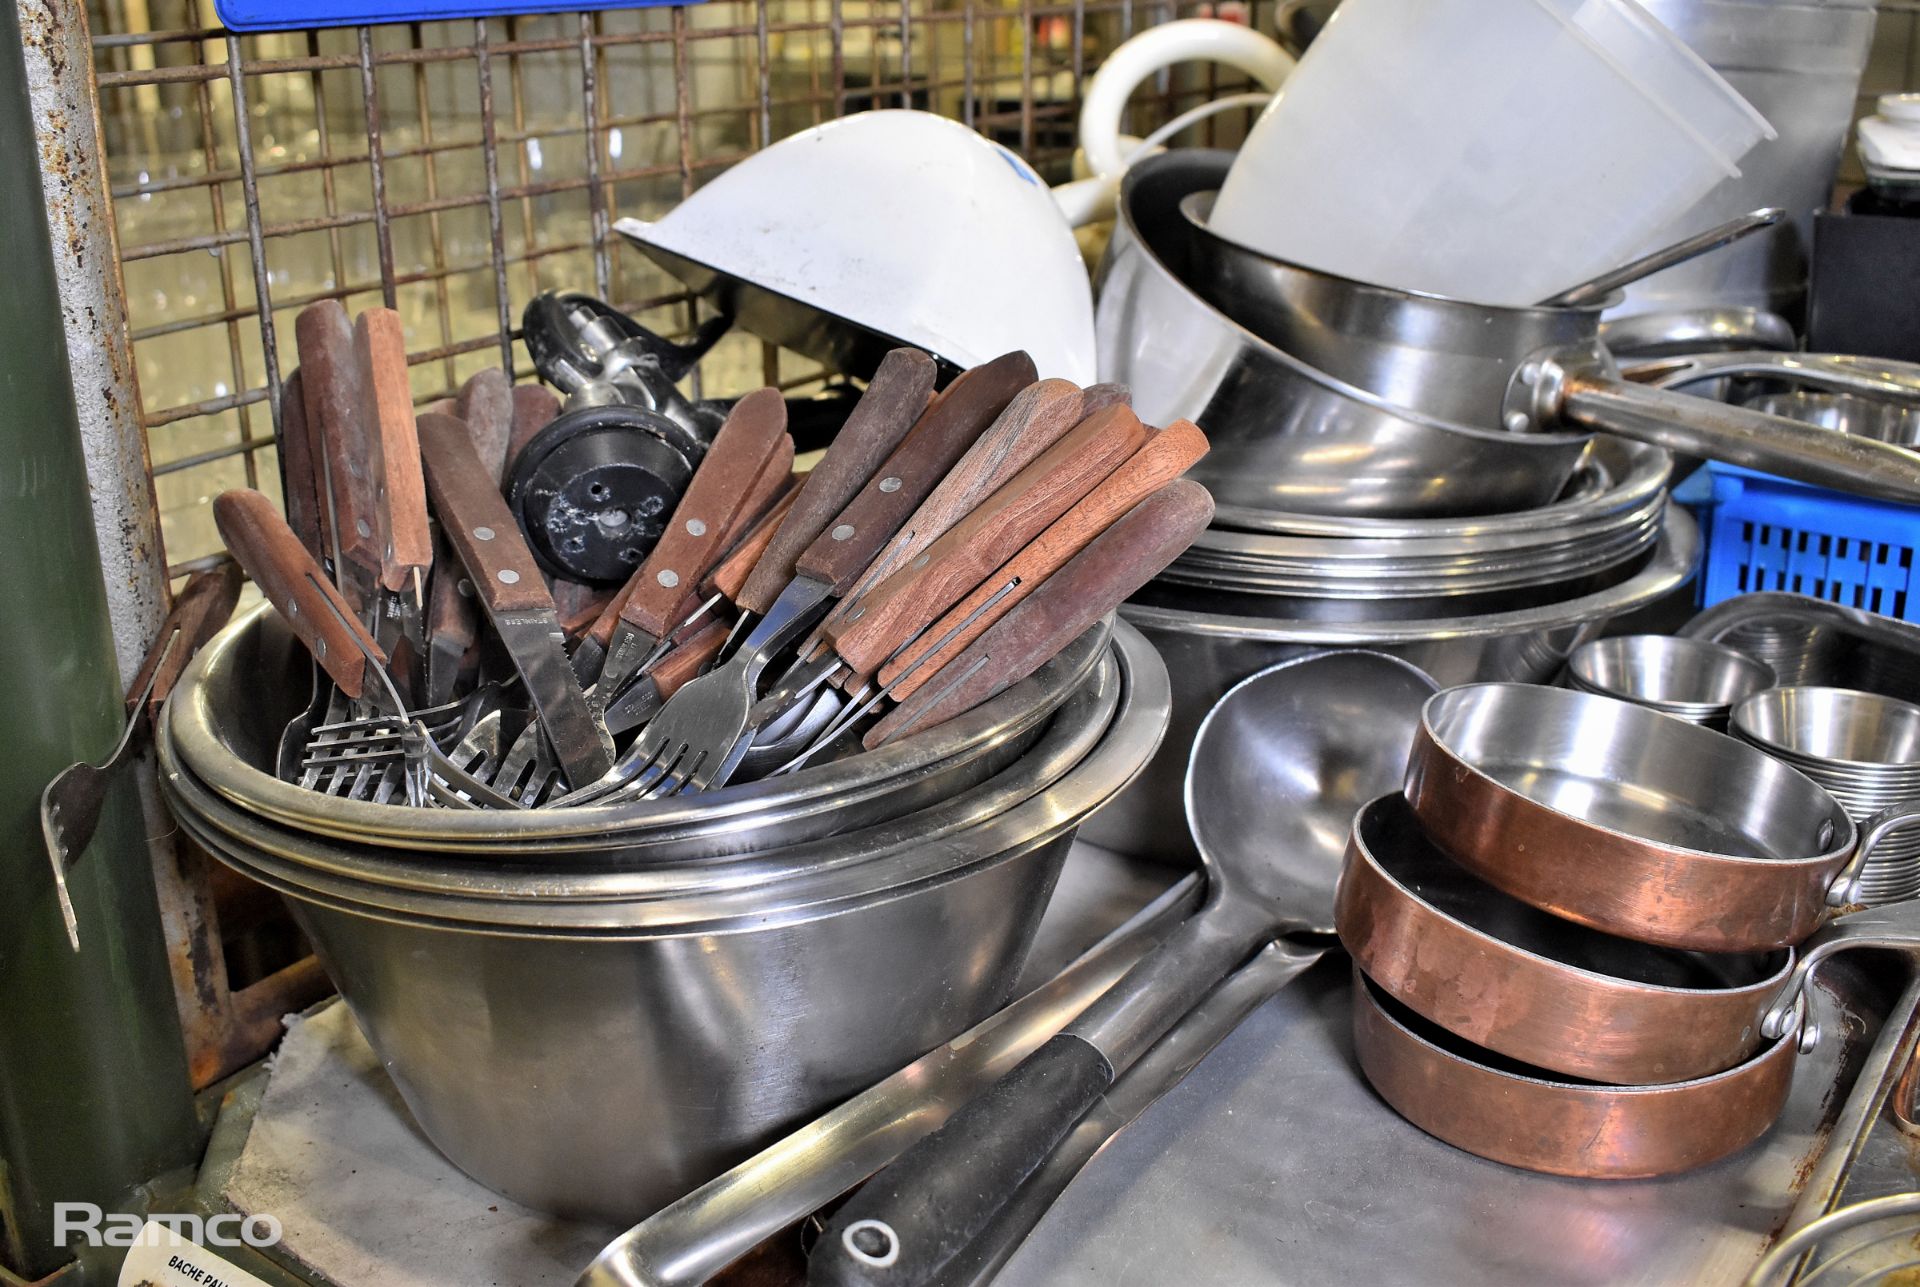 Catering equipment - pans, oven cooking trays, colanders, cutlery and utensils - Image 4 of 6